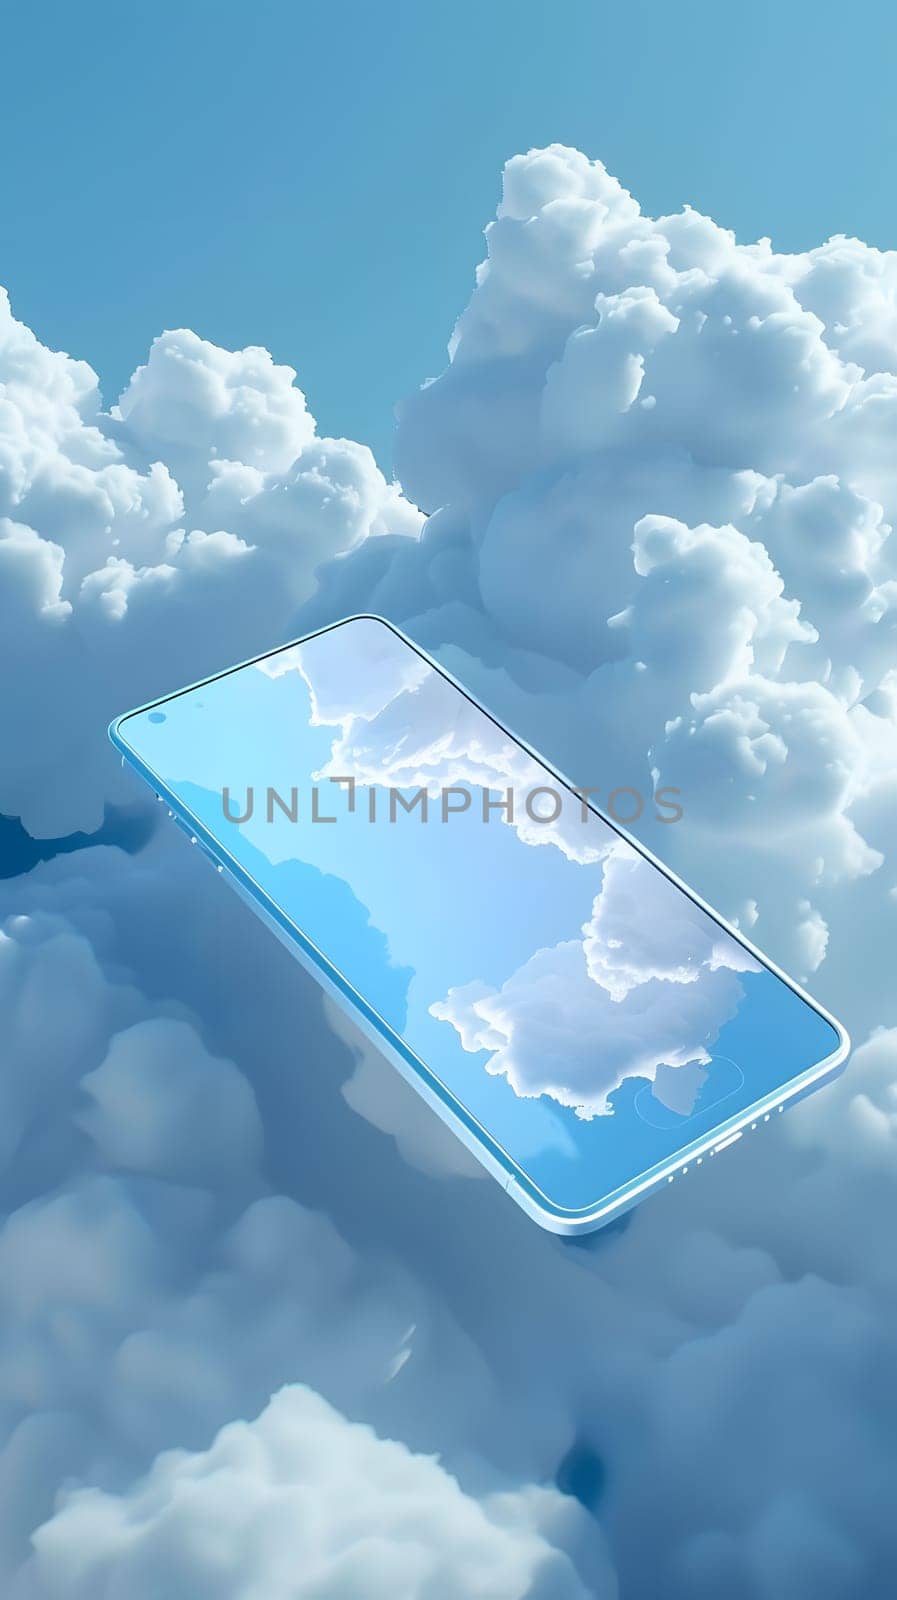 A rectangular cell phone floats among cumulus clouds in the sky by Nadtochiy